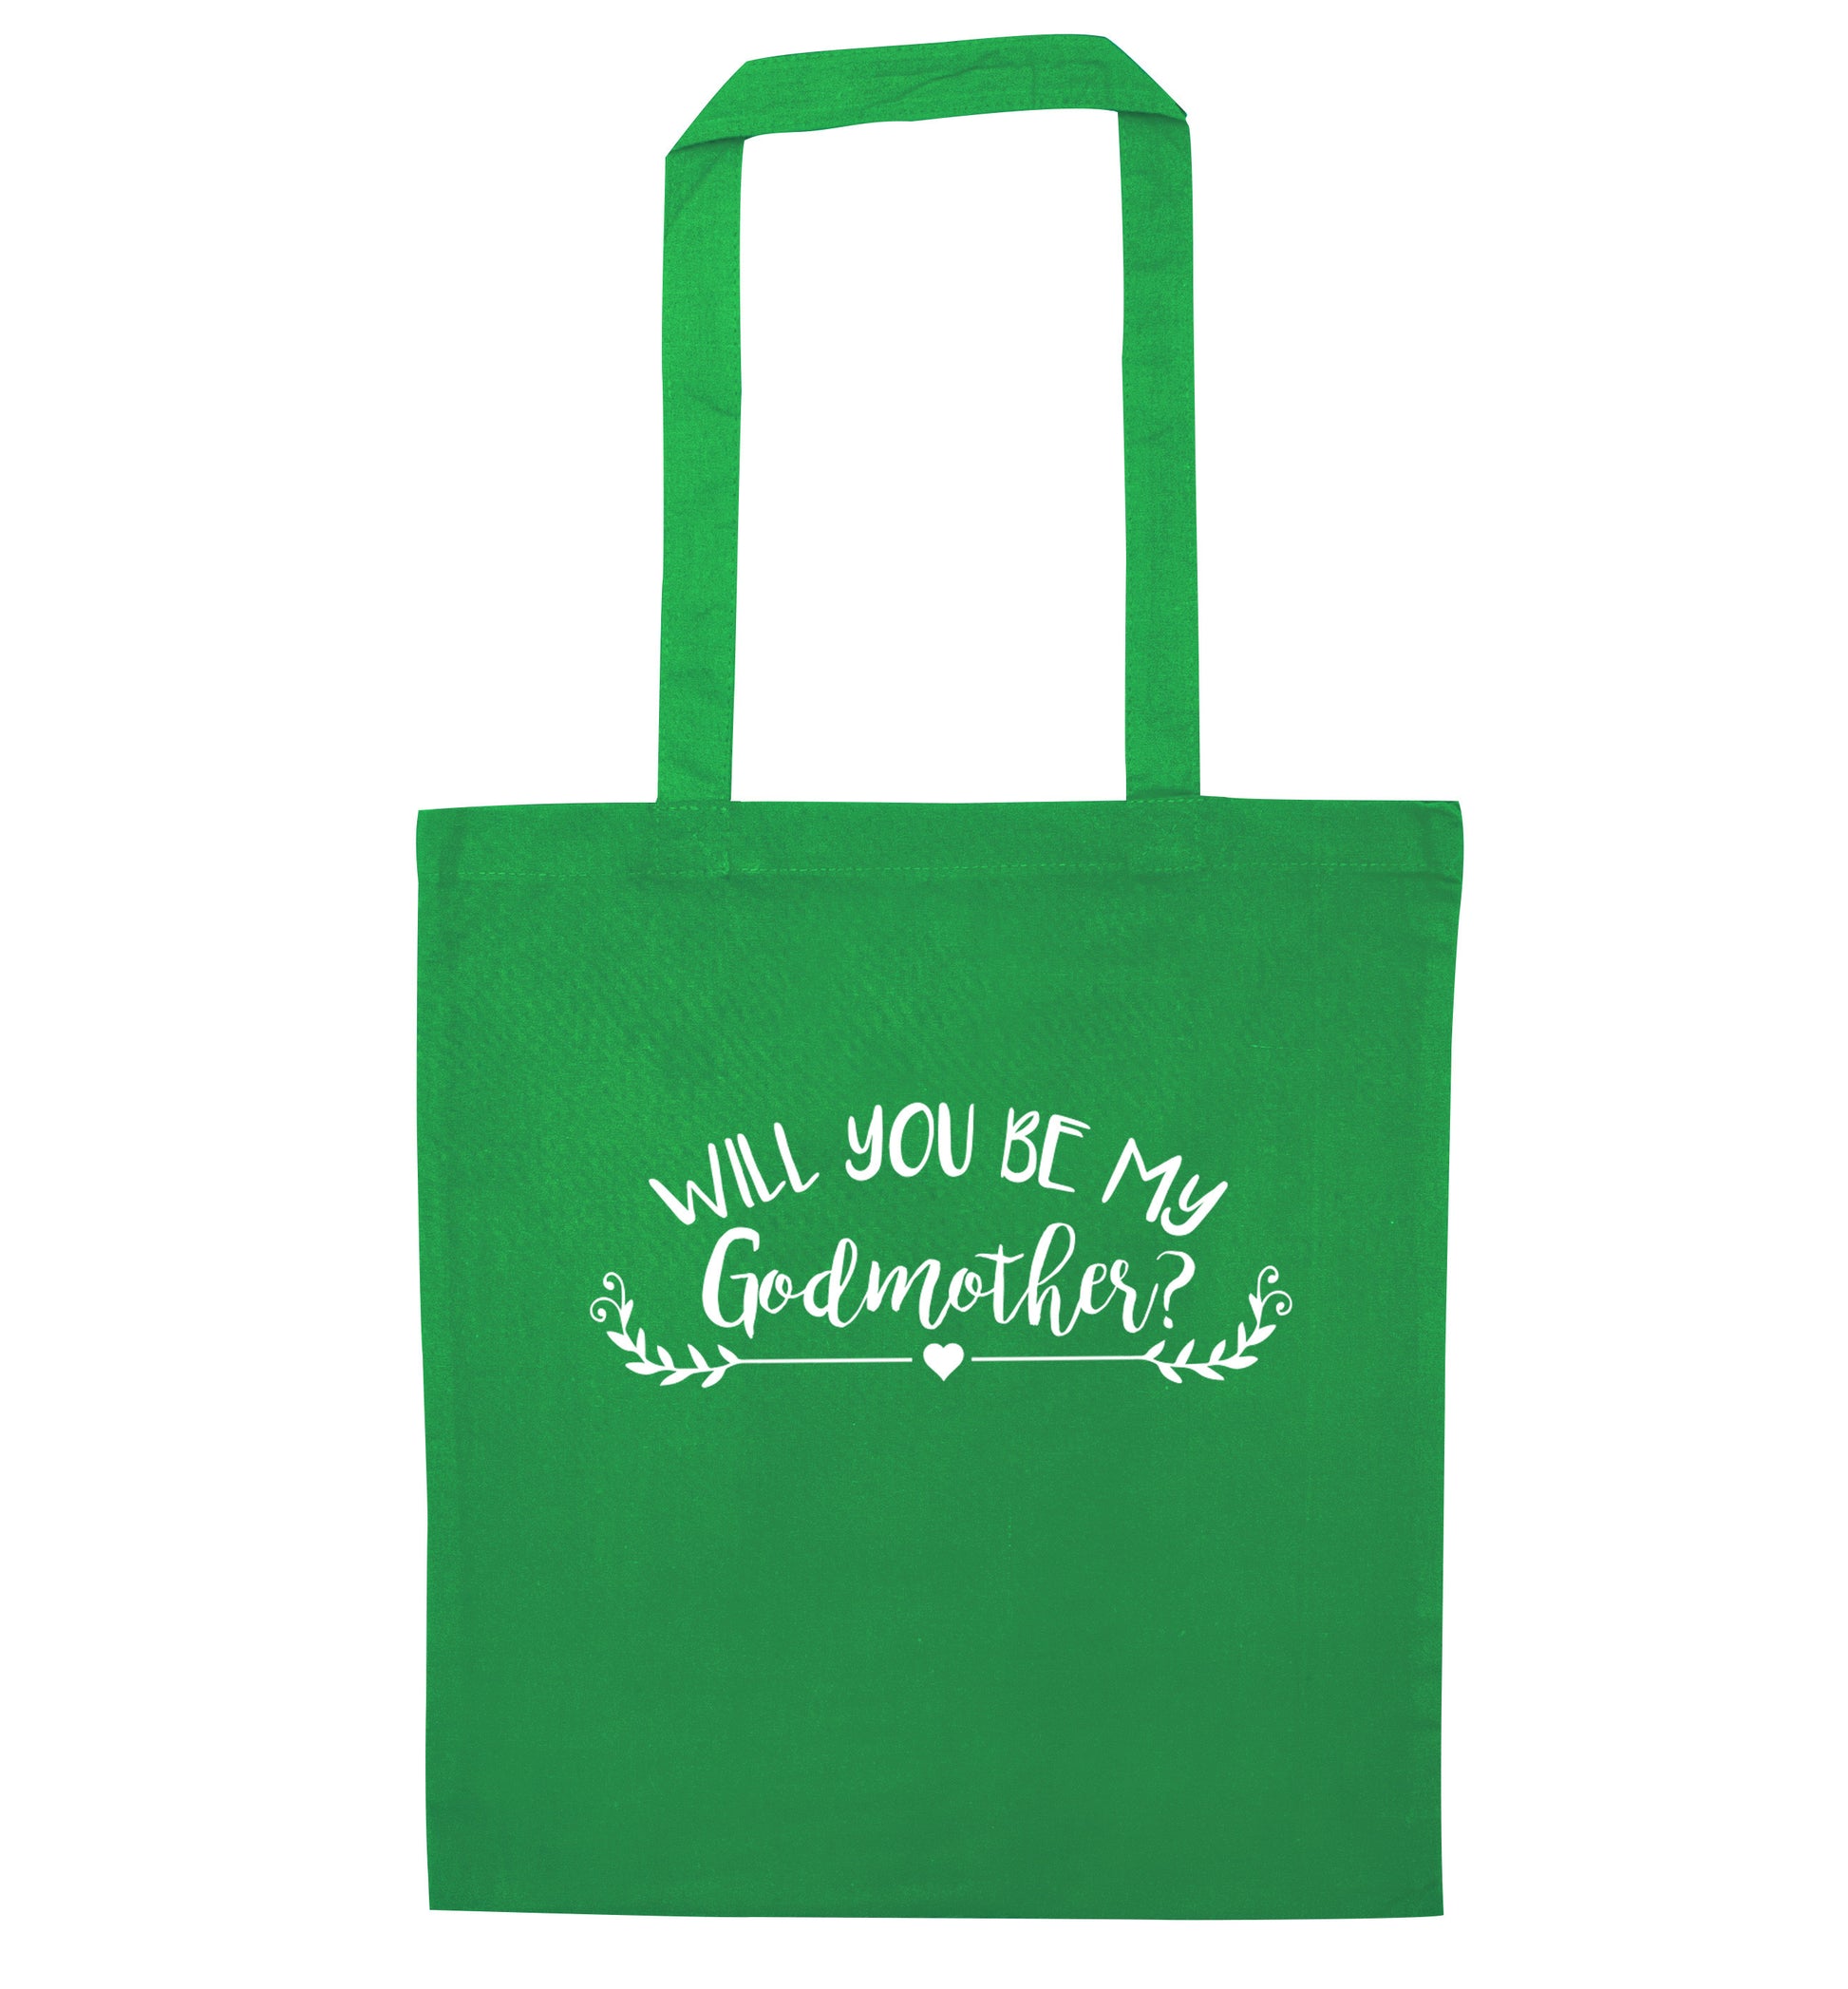 Will you be my godmother? green tote bag